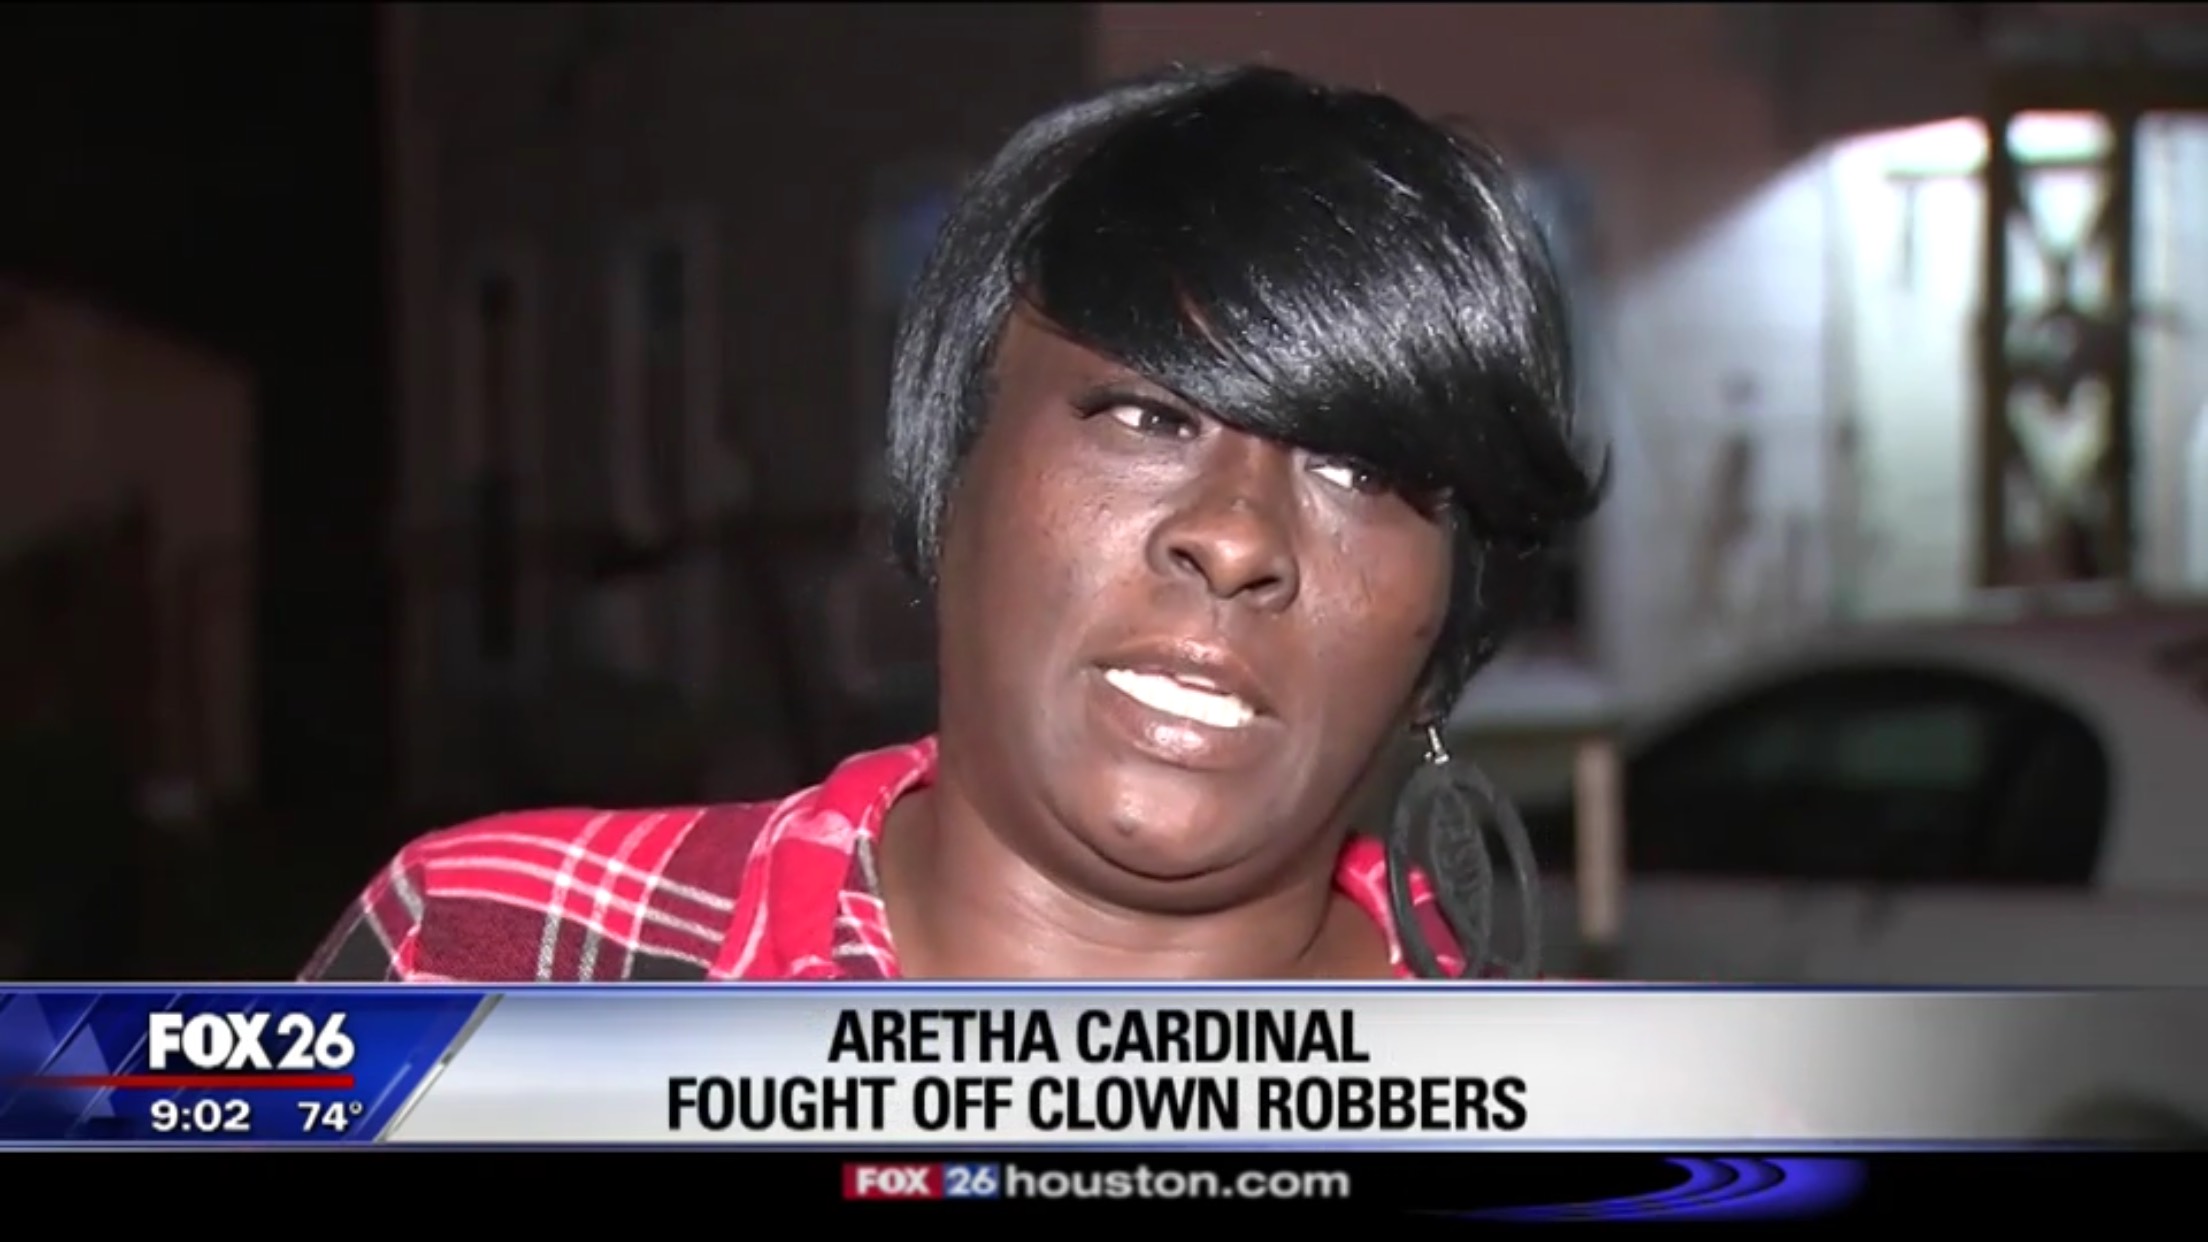 Aretha Cardinal: Fought Off Clown Robbers